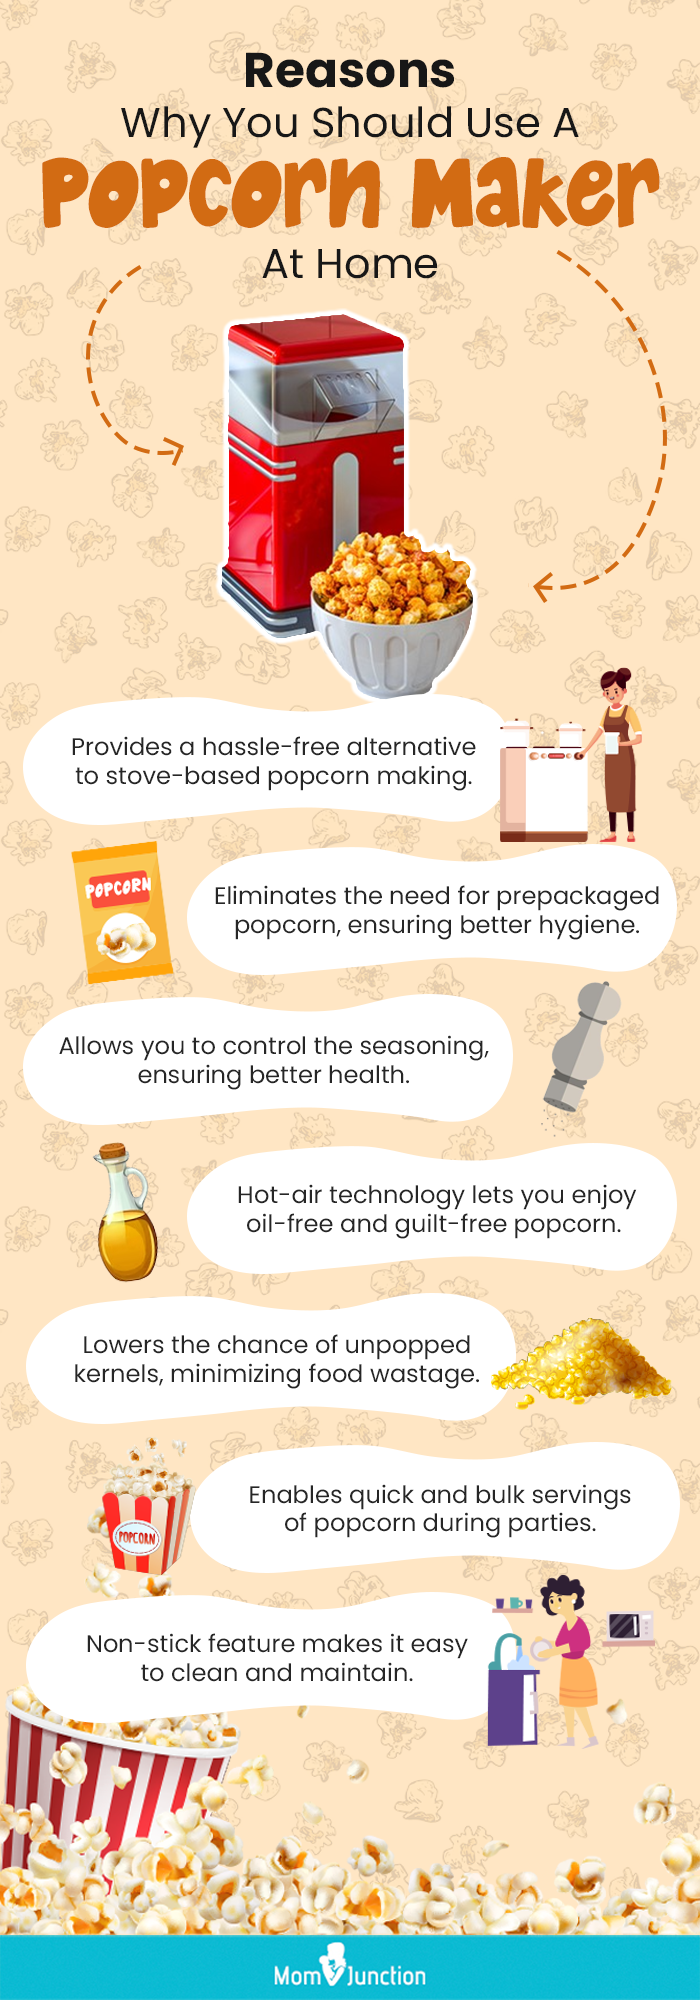 Reasons Why You Should Use A Popcorn Maker At Home(infographic)